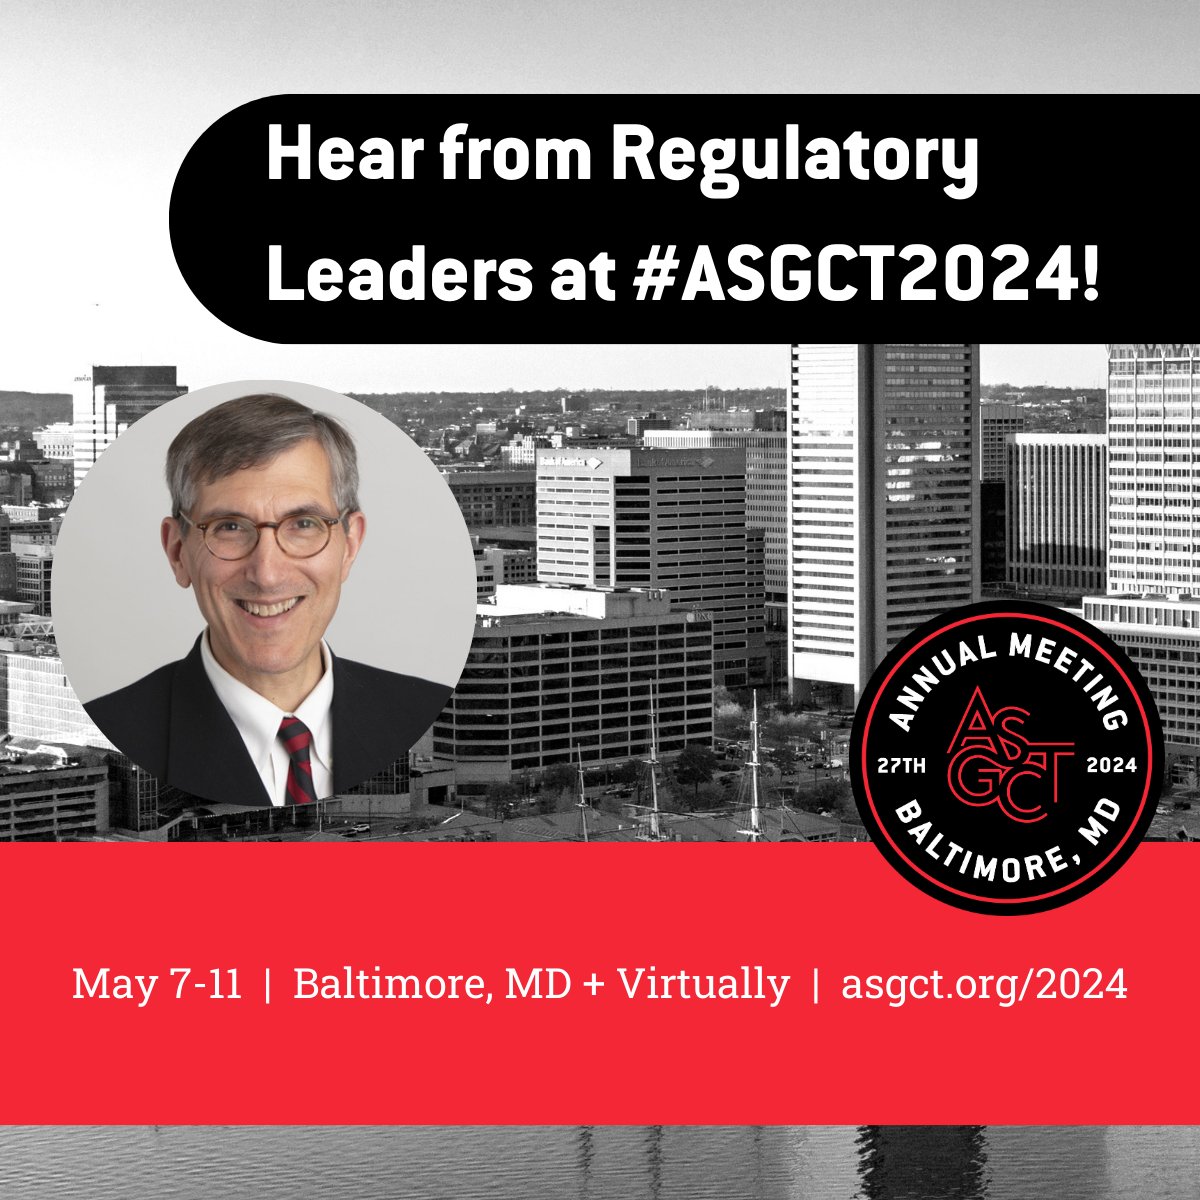 Attend MORE Fireside Chats at #ASGCT2024! This year, learn from three separate chats that focus on the regulatory side of CGT, including two with @FDACBER Director Peter Marks, and others with speakers from @ncats_nih_gov, @ARPAHealth, + more. bit.ly/3v4arus